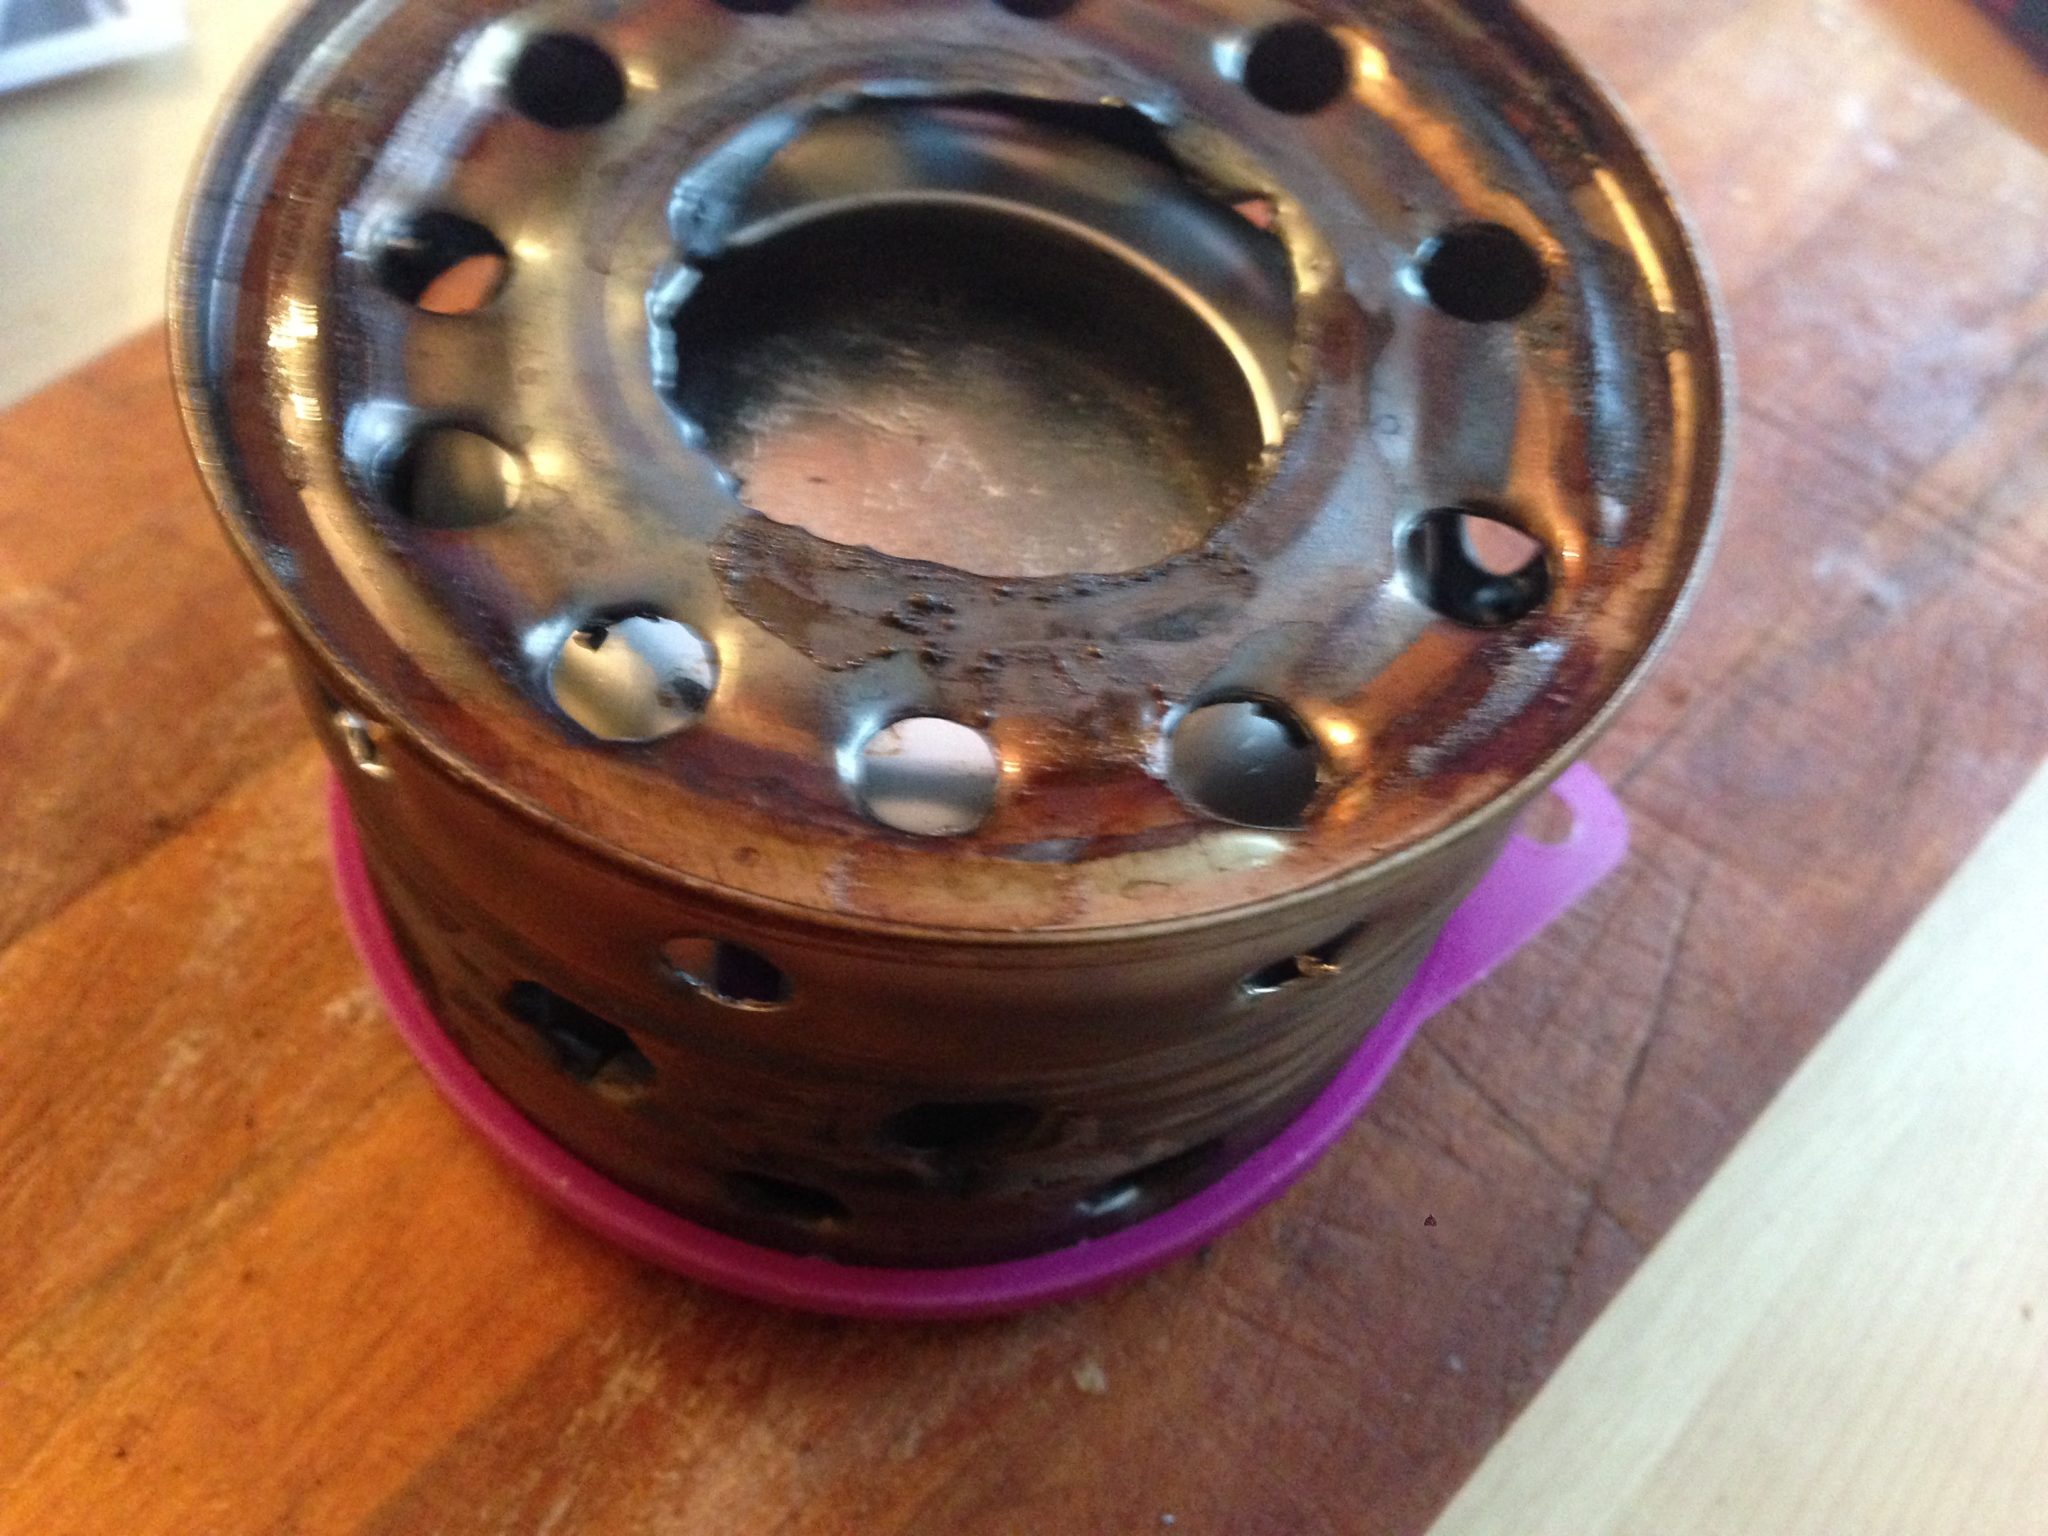 packed up alcohol stove